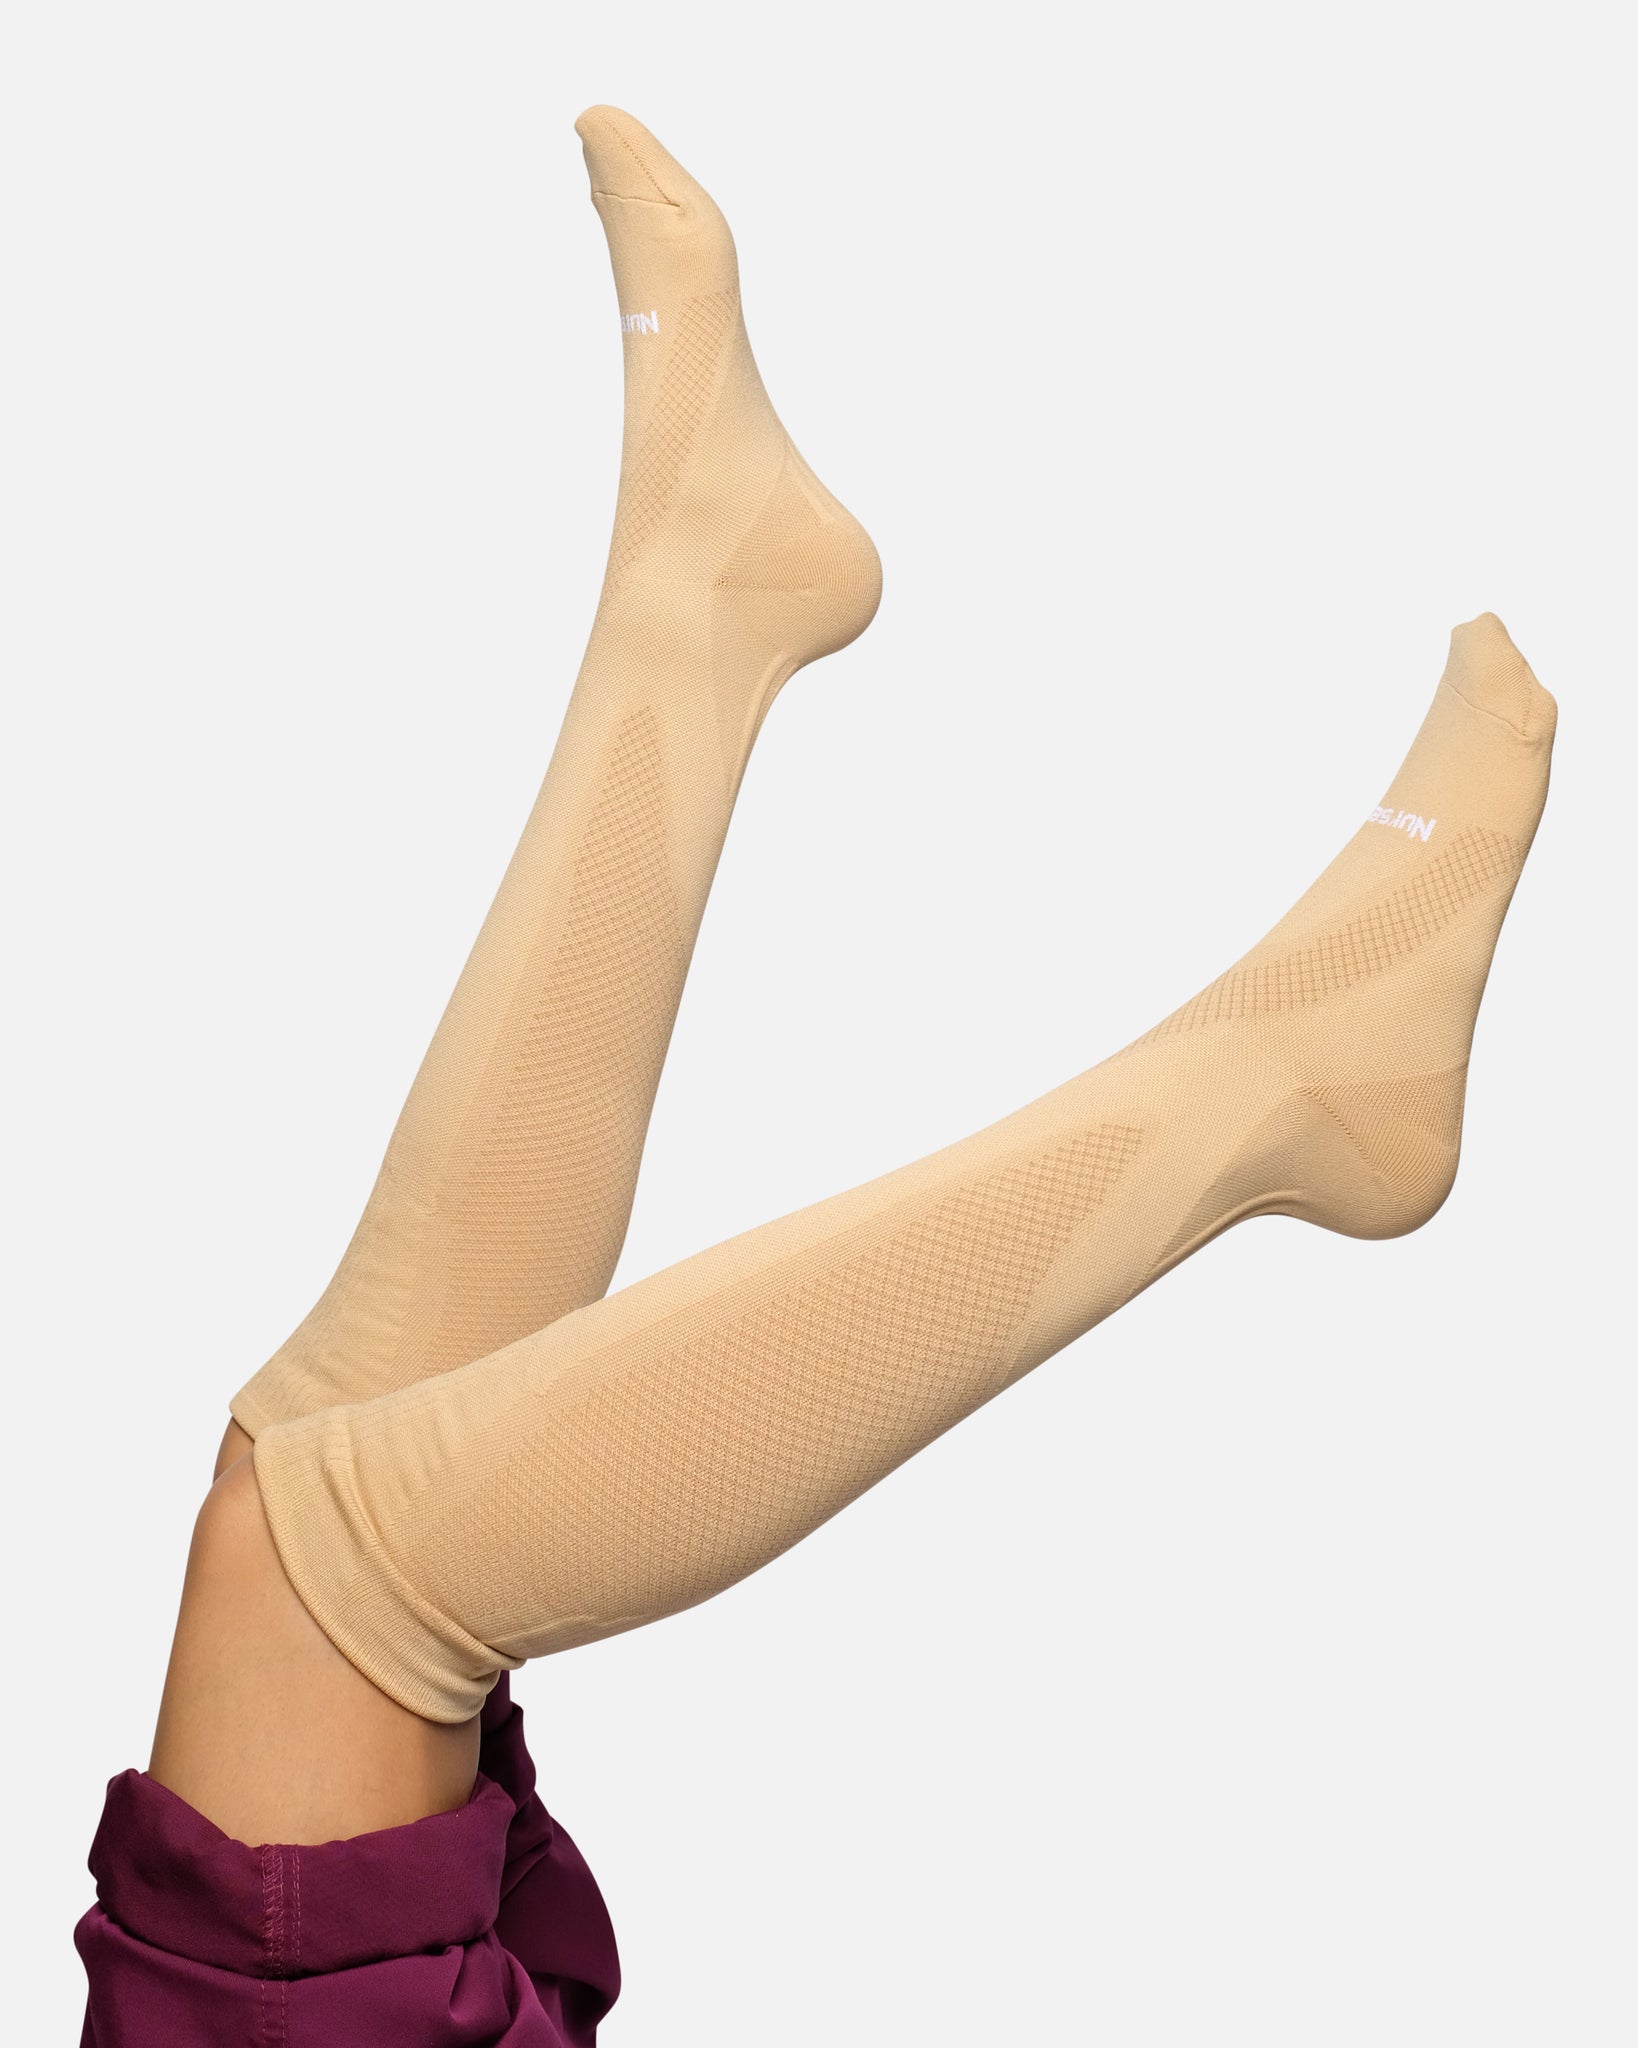 What Are the Benefits of Compression Socks for Dancers?